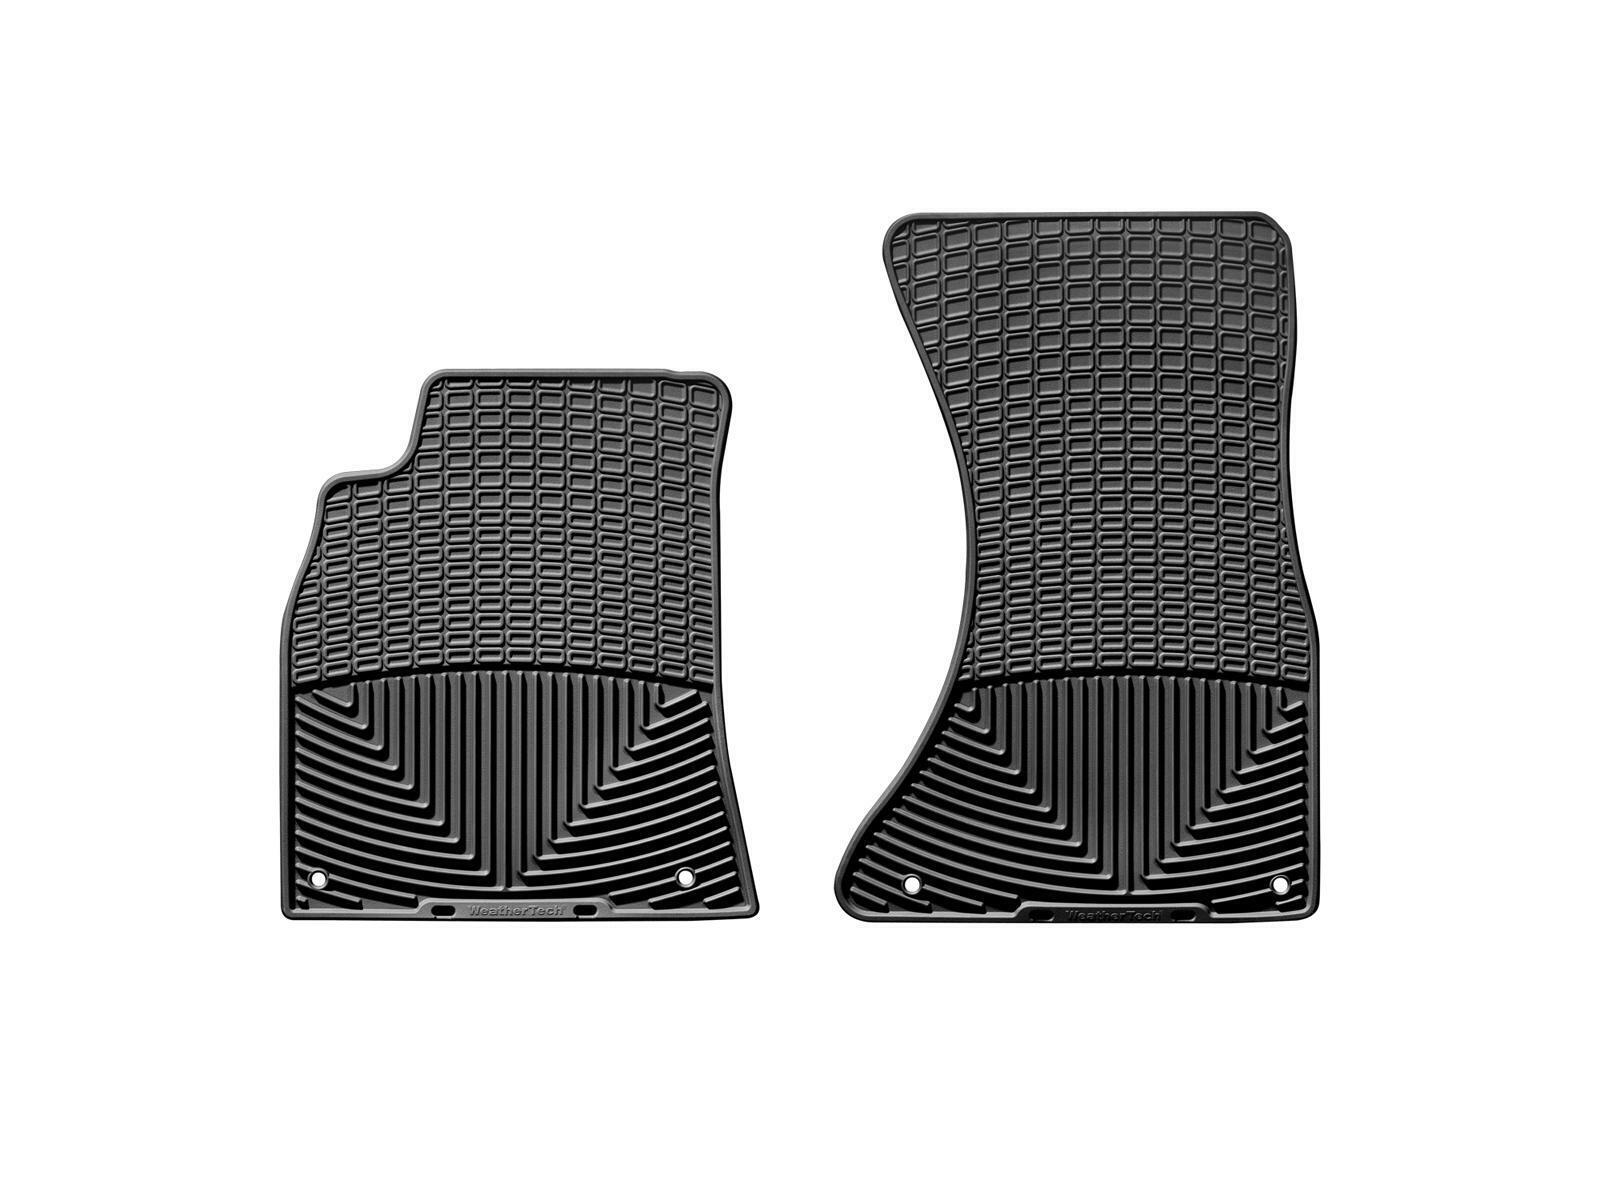 WeatherTech All-Weather Floor Mats for Audi A4/A5/S4/S5/RS5 - 1st Row, Black